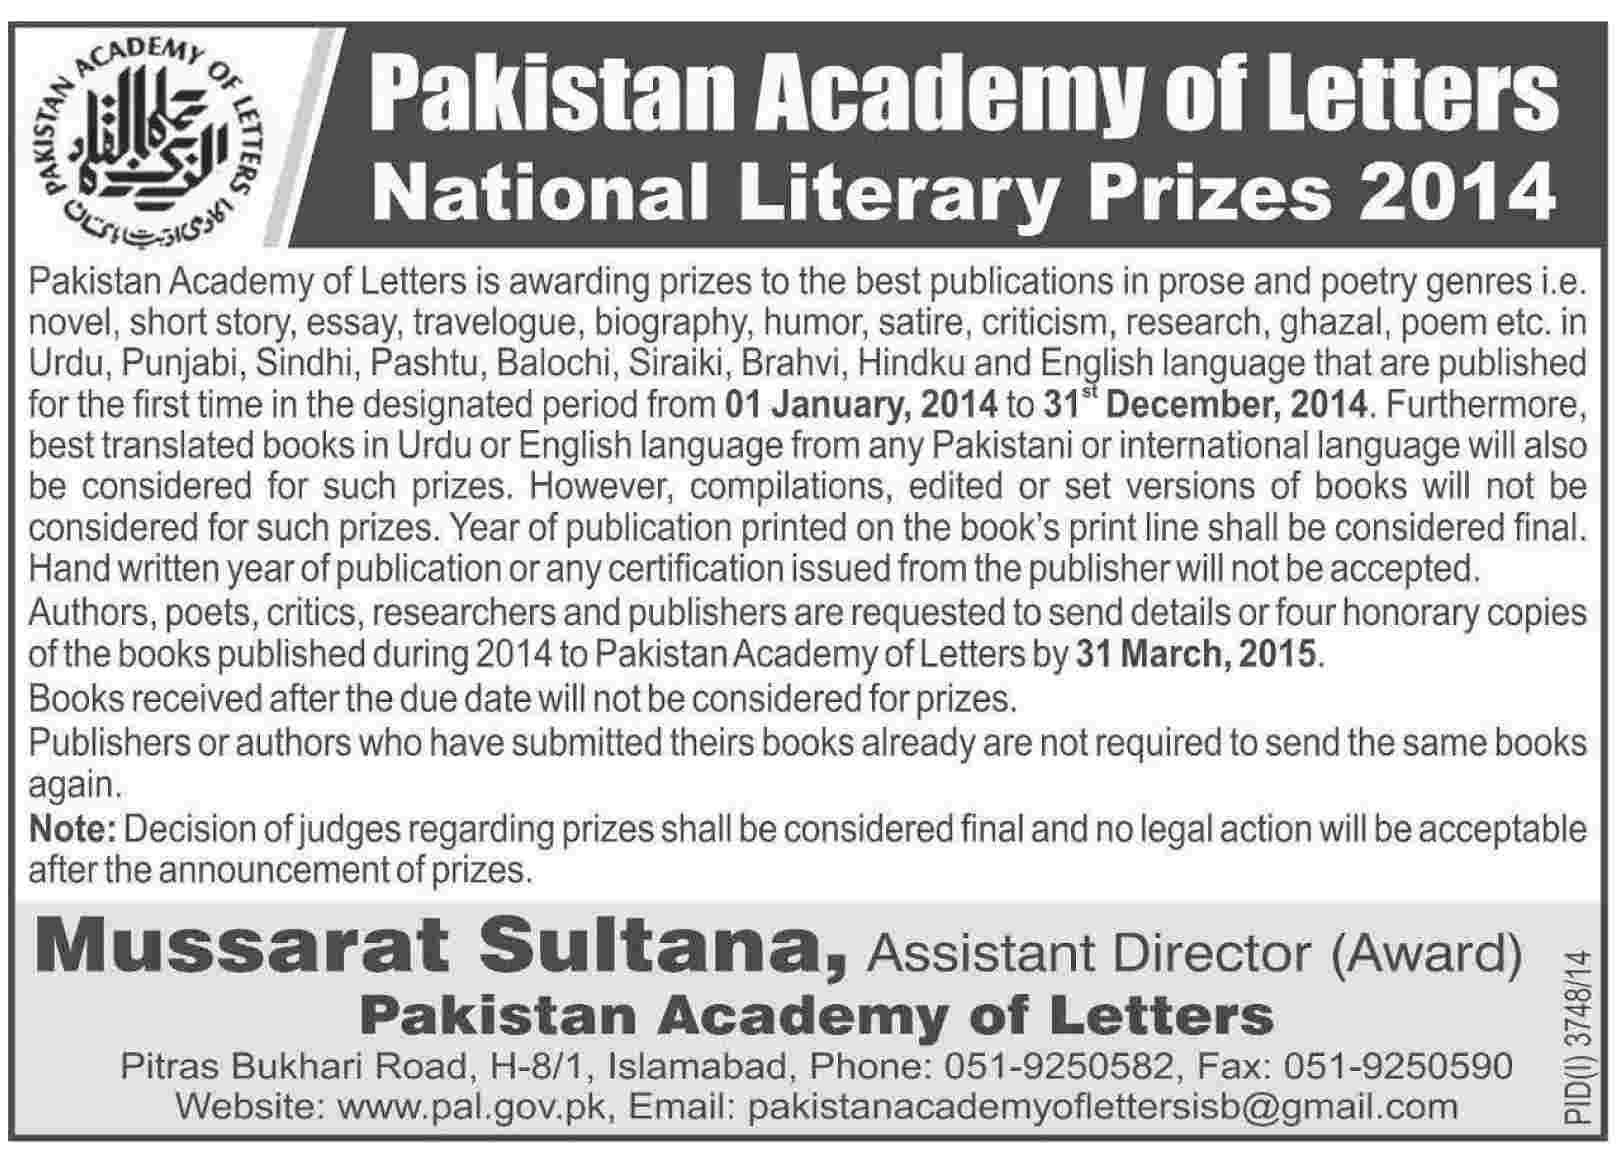 National Literary Prizes 2014 Awarding by Pakistan Academy of Letters